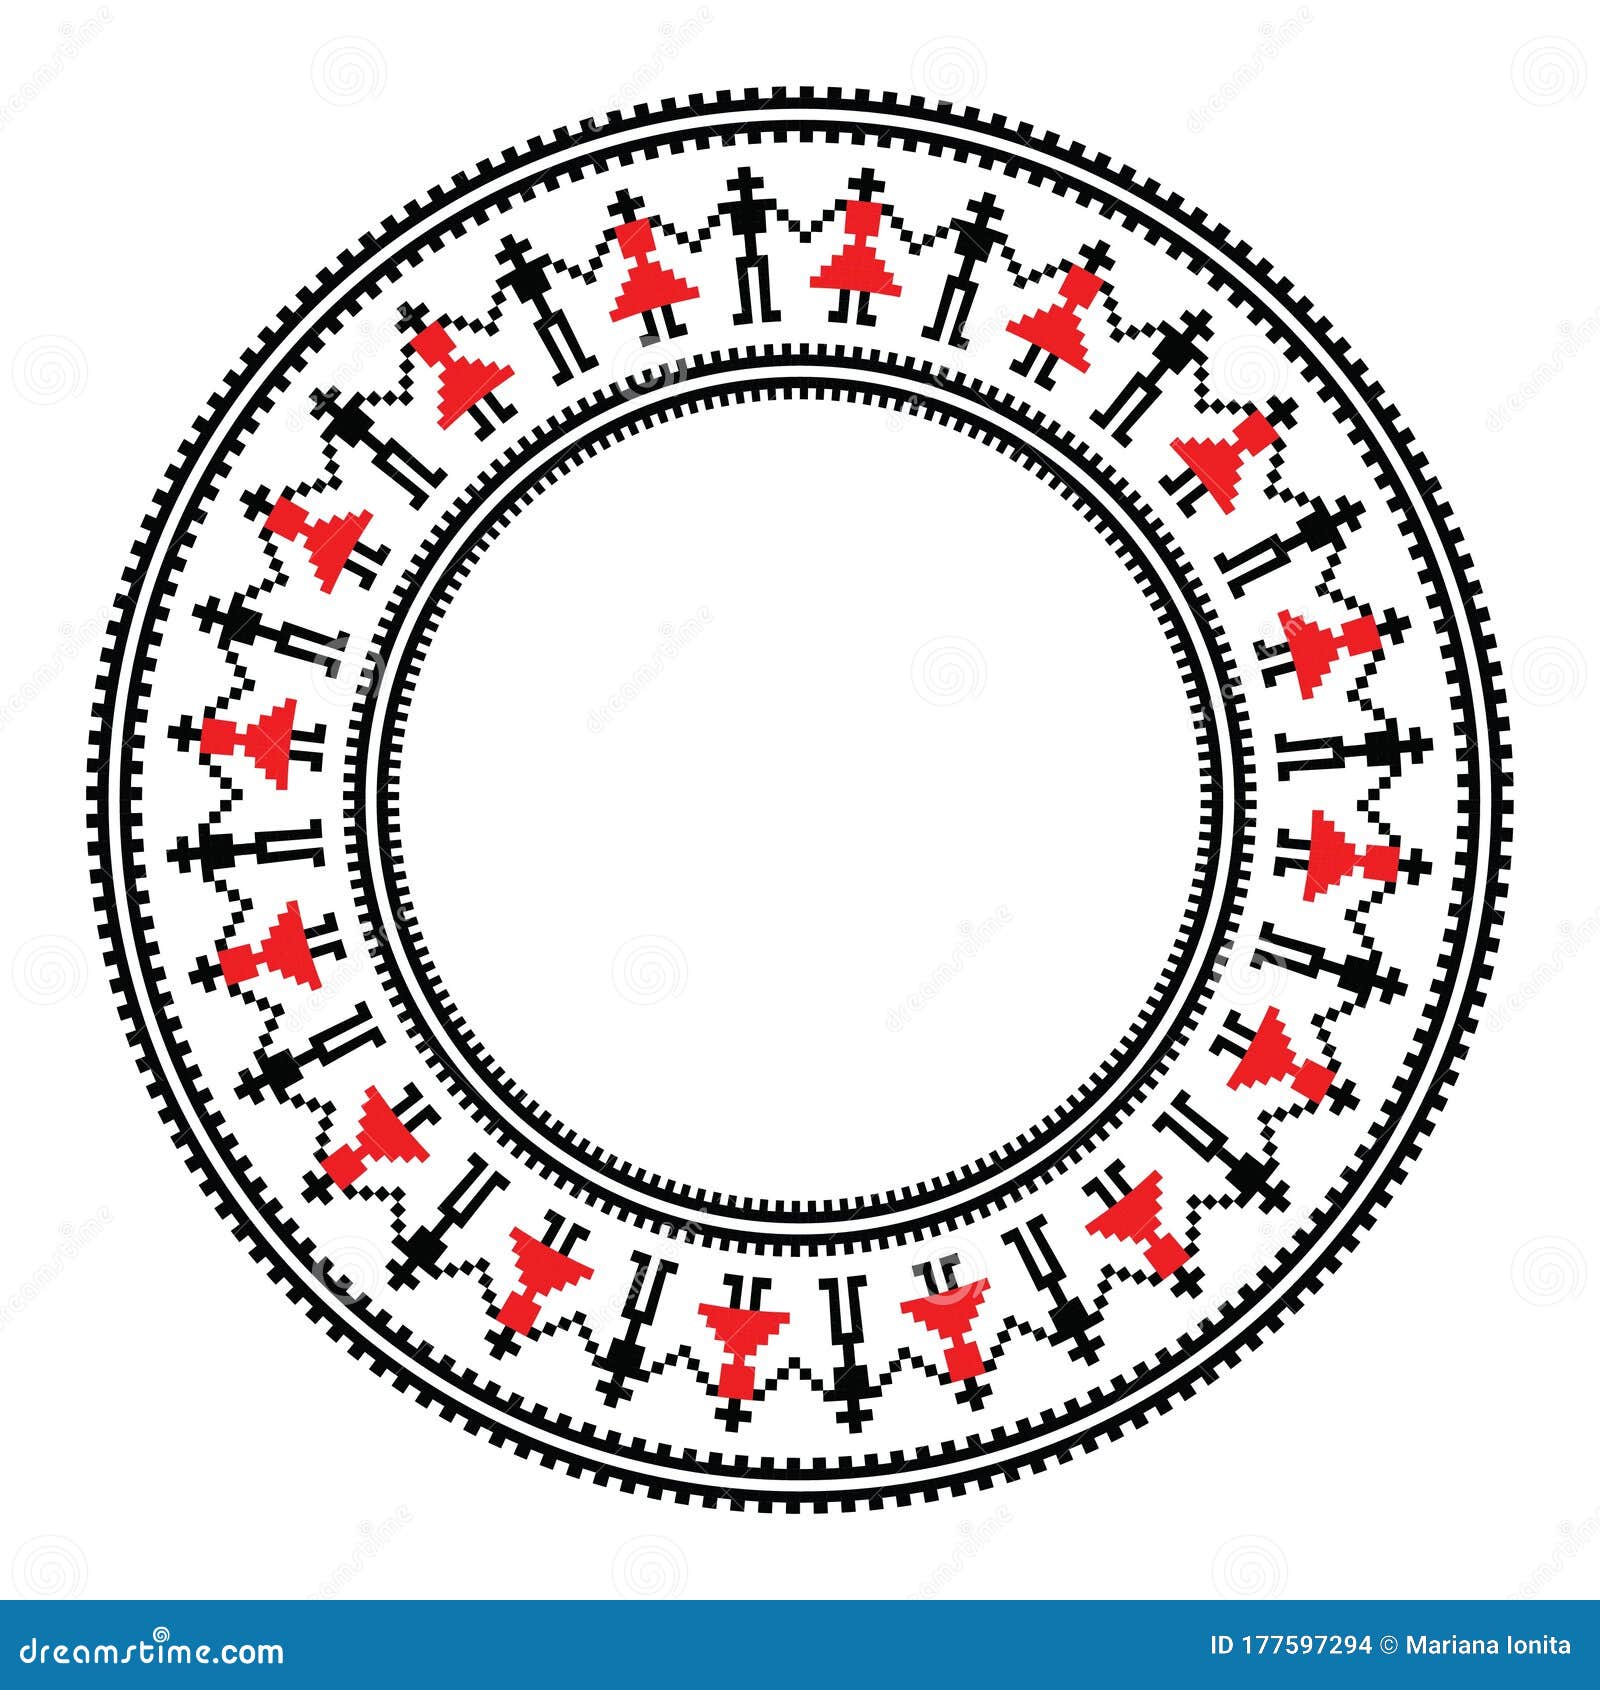 tradional round frame with romanian folk dance